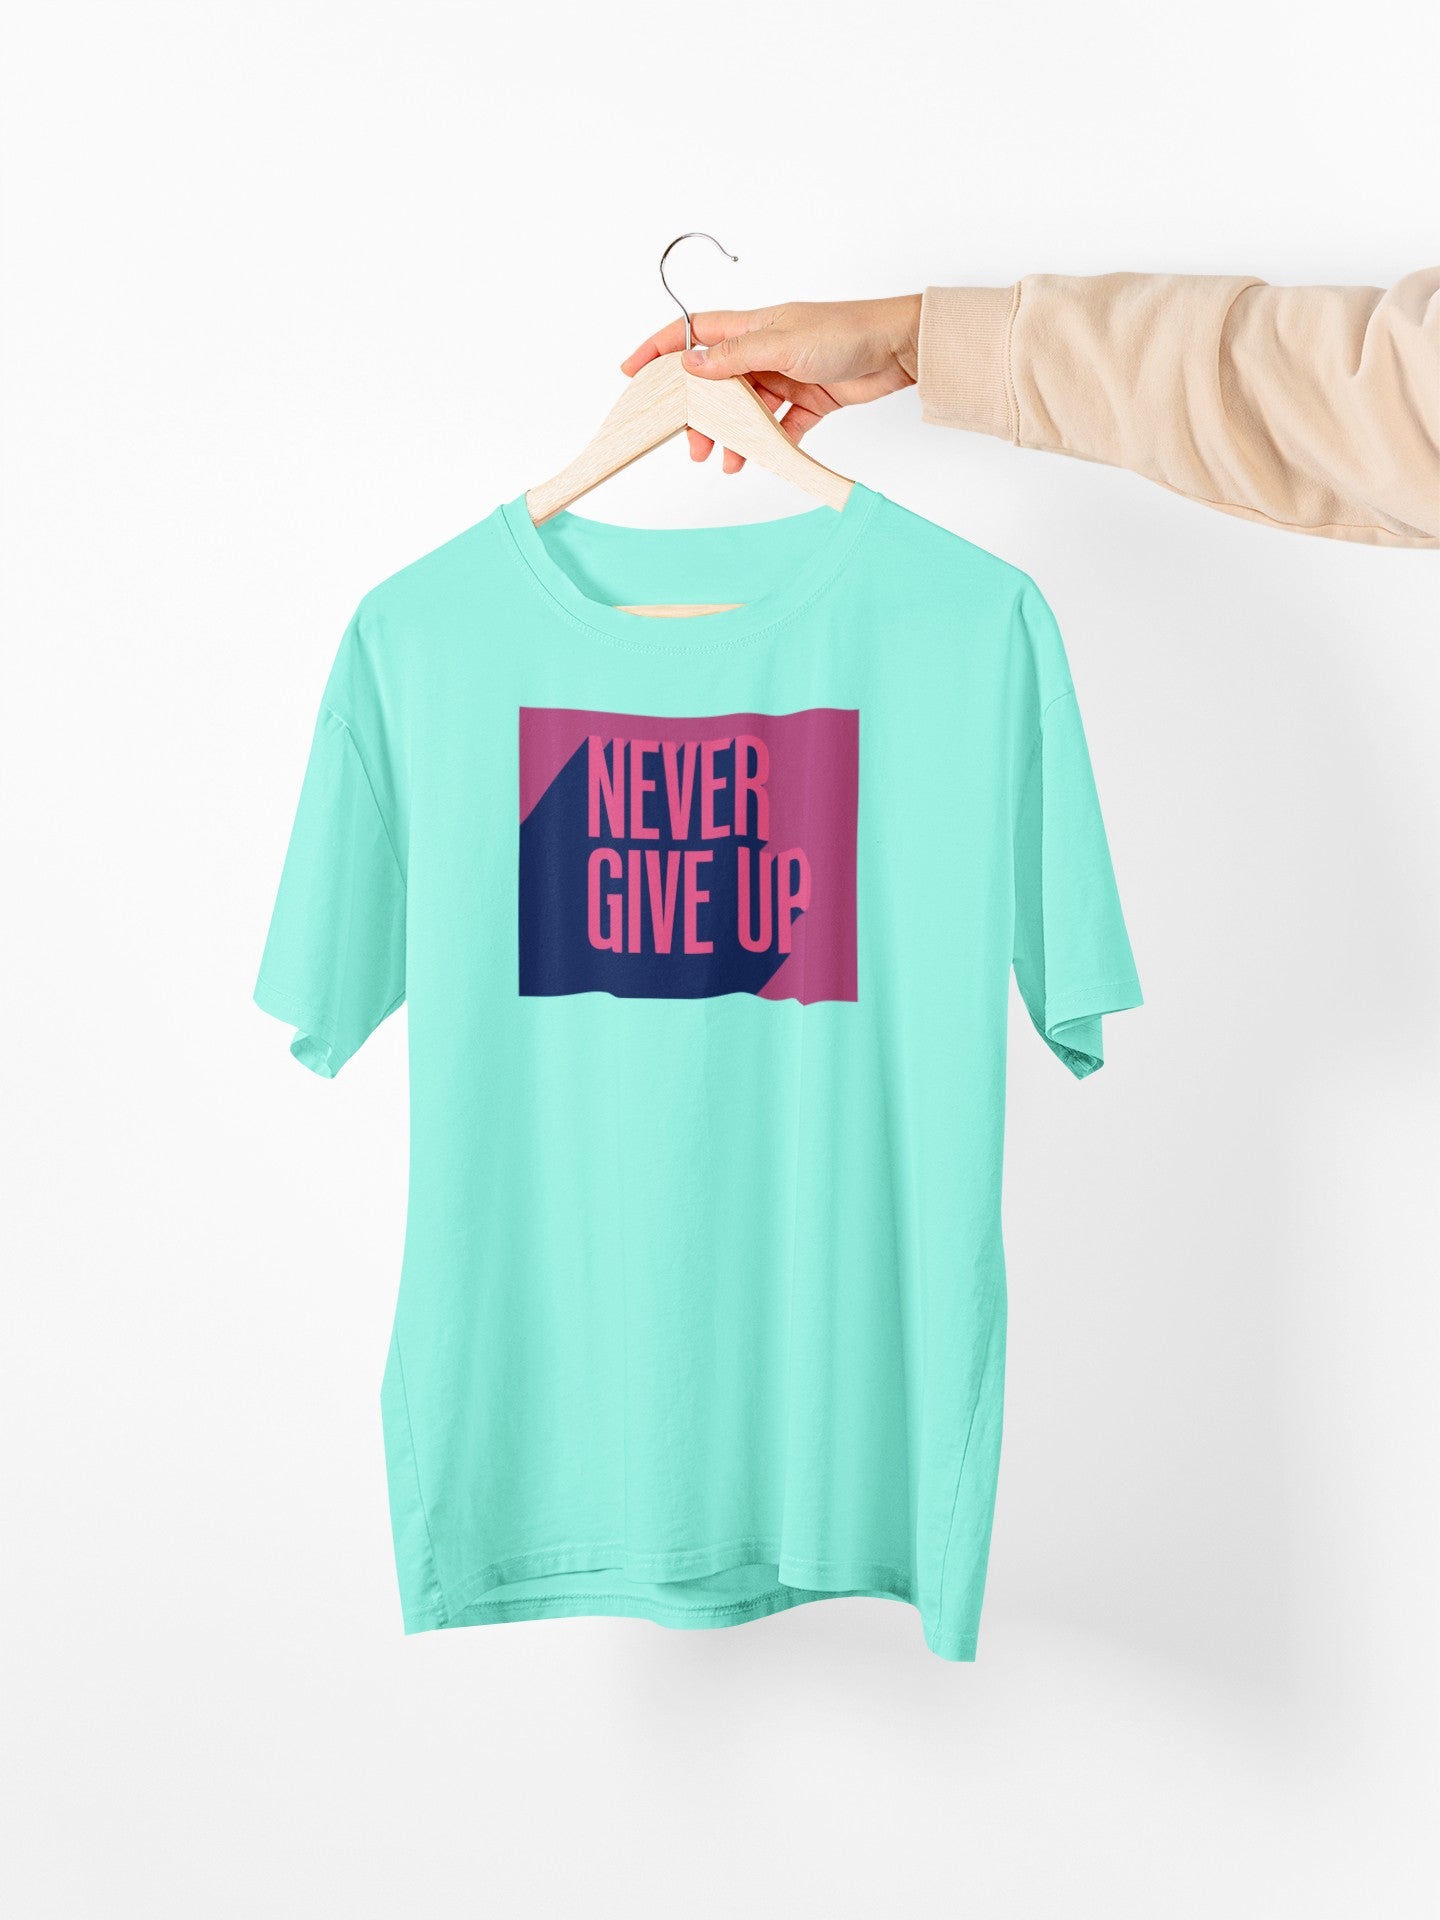 Gym T Shirt - Never Give Up 2.0 - Men T-Shirt with premium cotton Lycra. The Sports T Shirt by Strong Soul